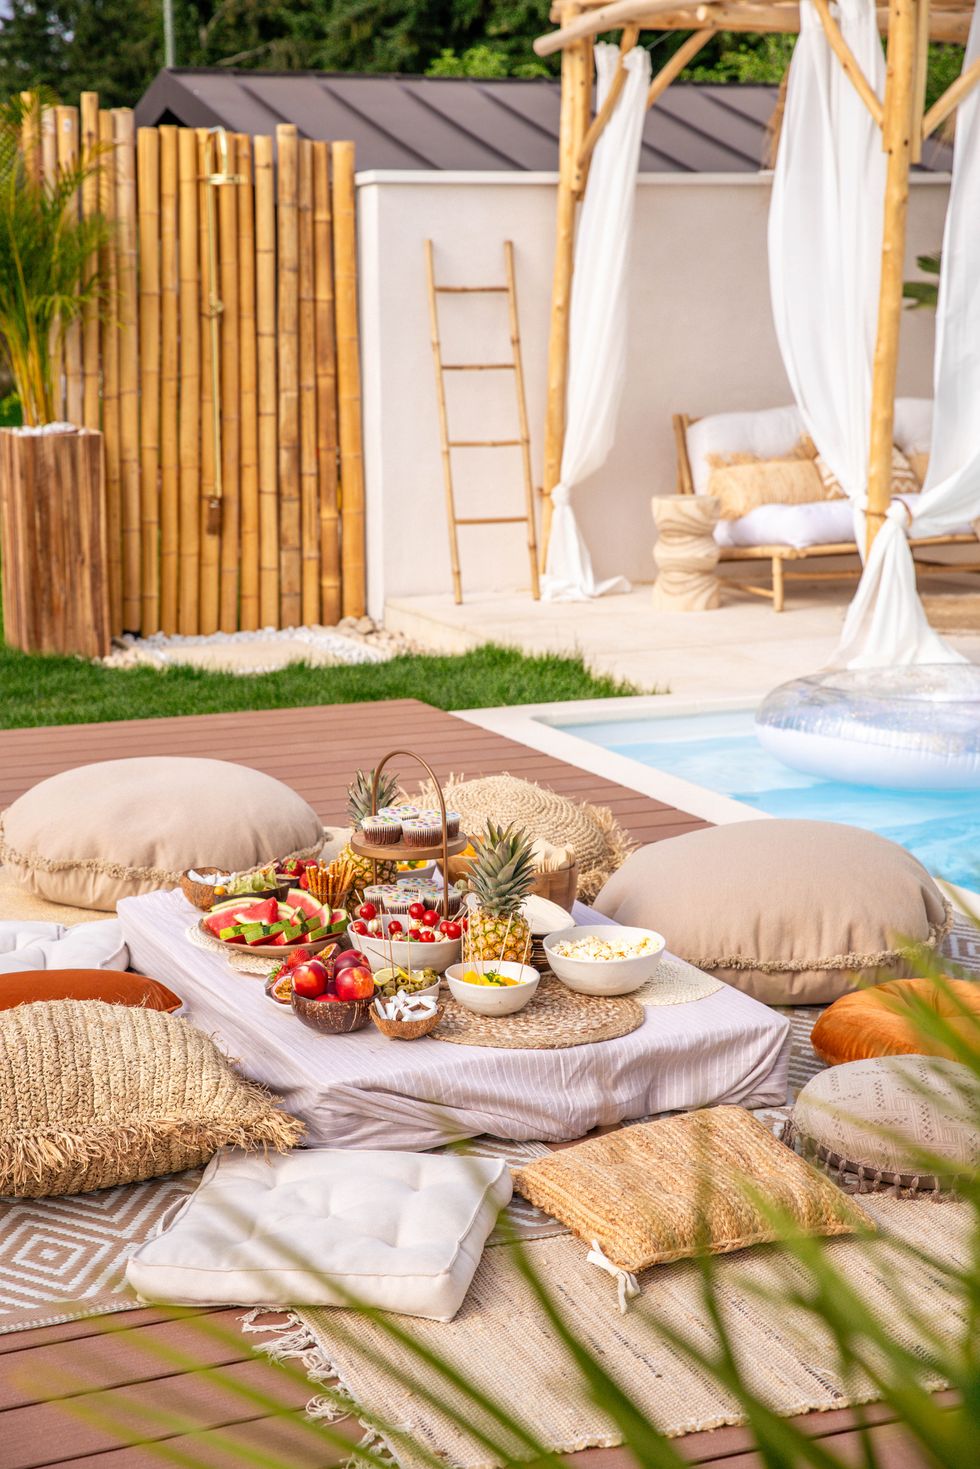 boho garden party picnic by the swimming pool on wood patio with food buffet and cushions